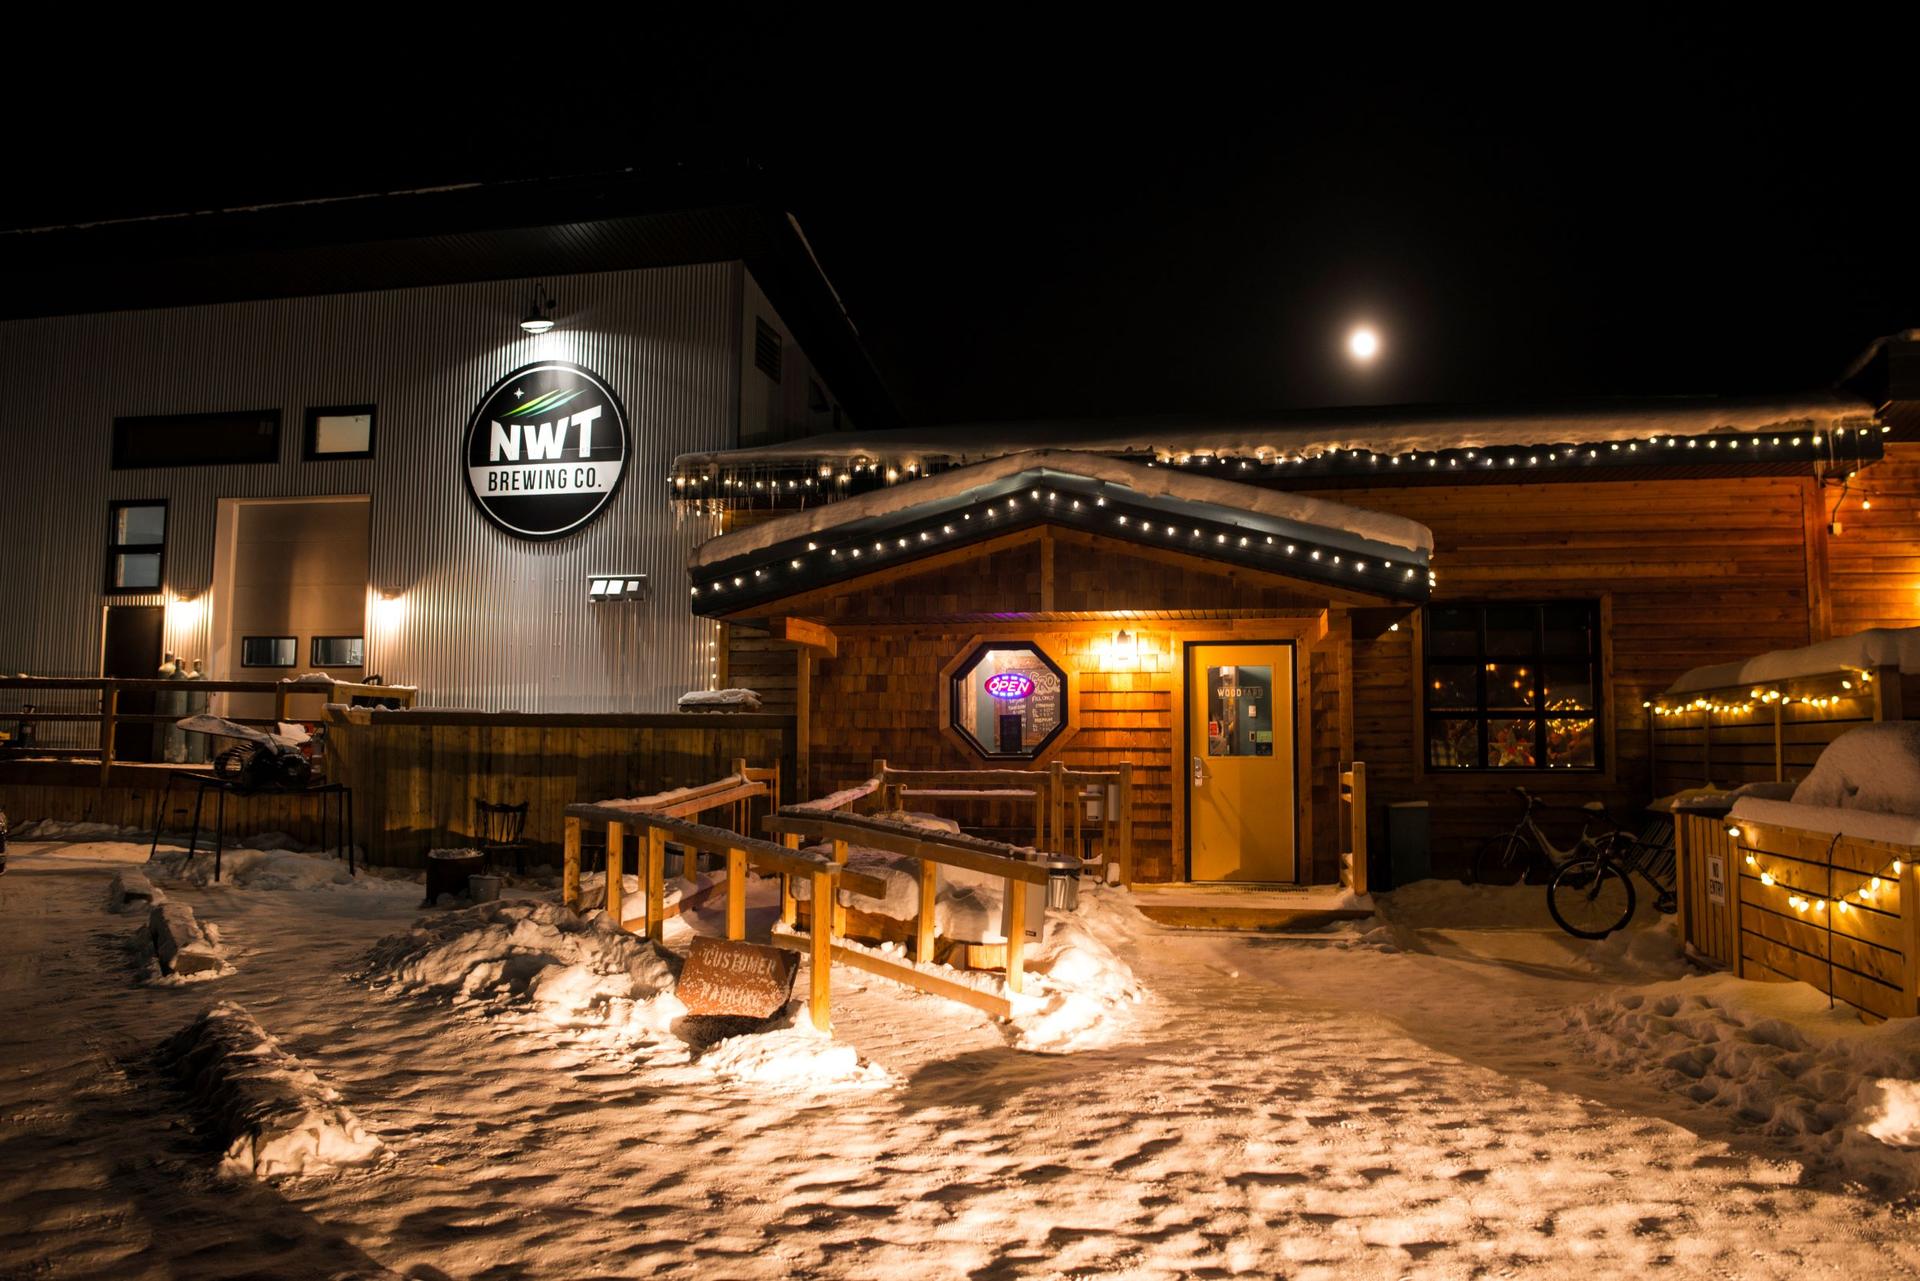 One-of-a-kind is the name of the game at Canada’s second northernmost brewery, NWT Brewing Co.